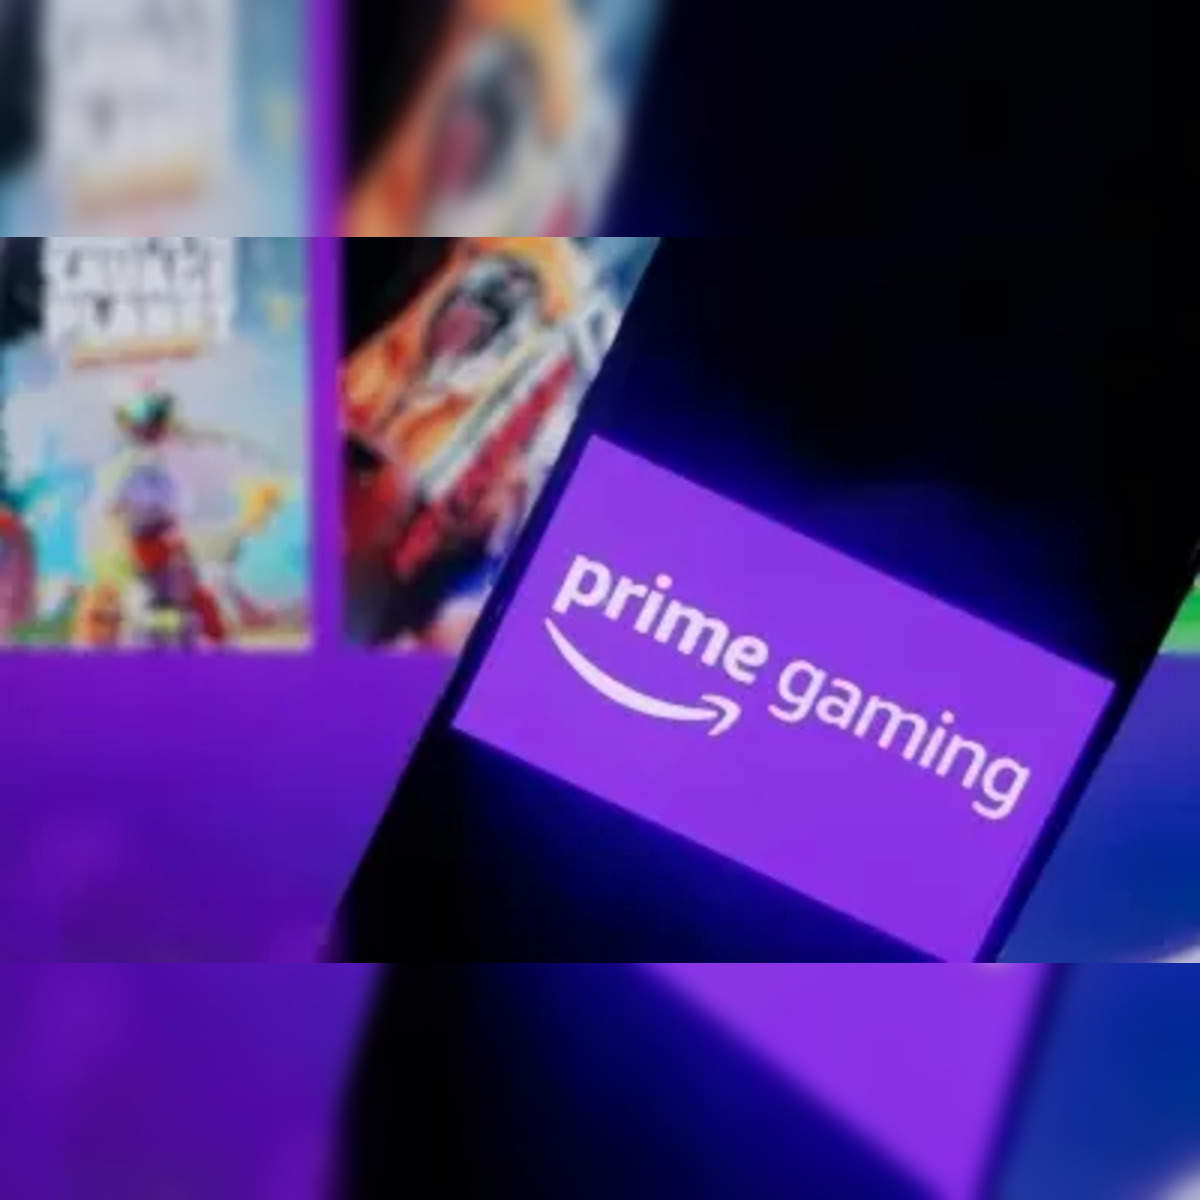 Prime Gaming launched in India with free games, in-game